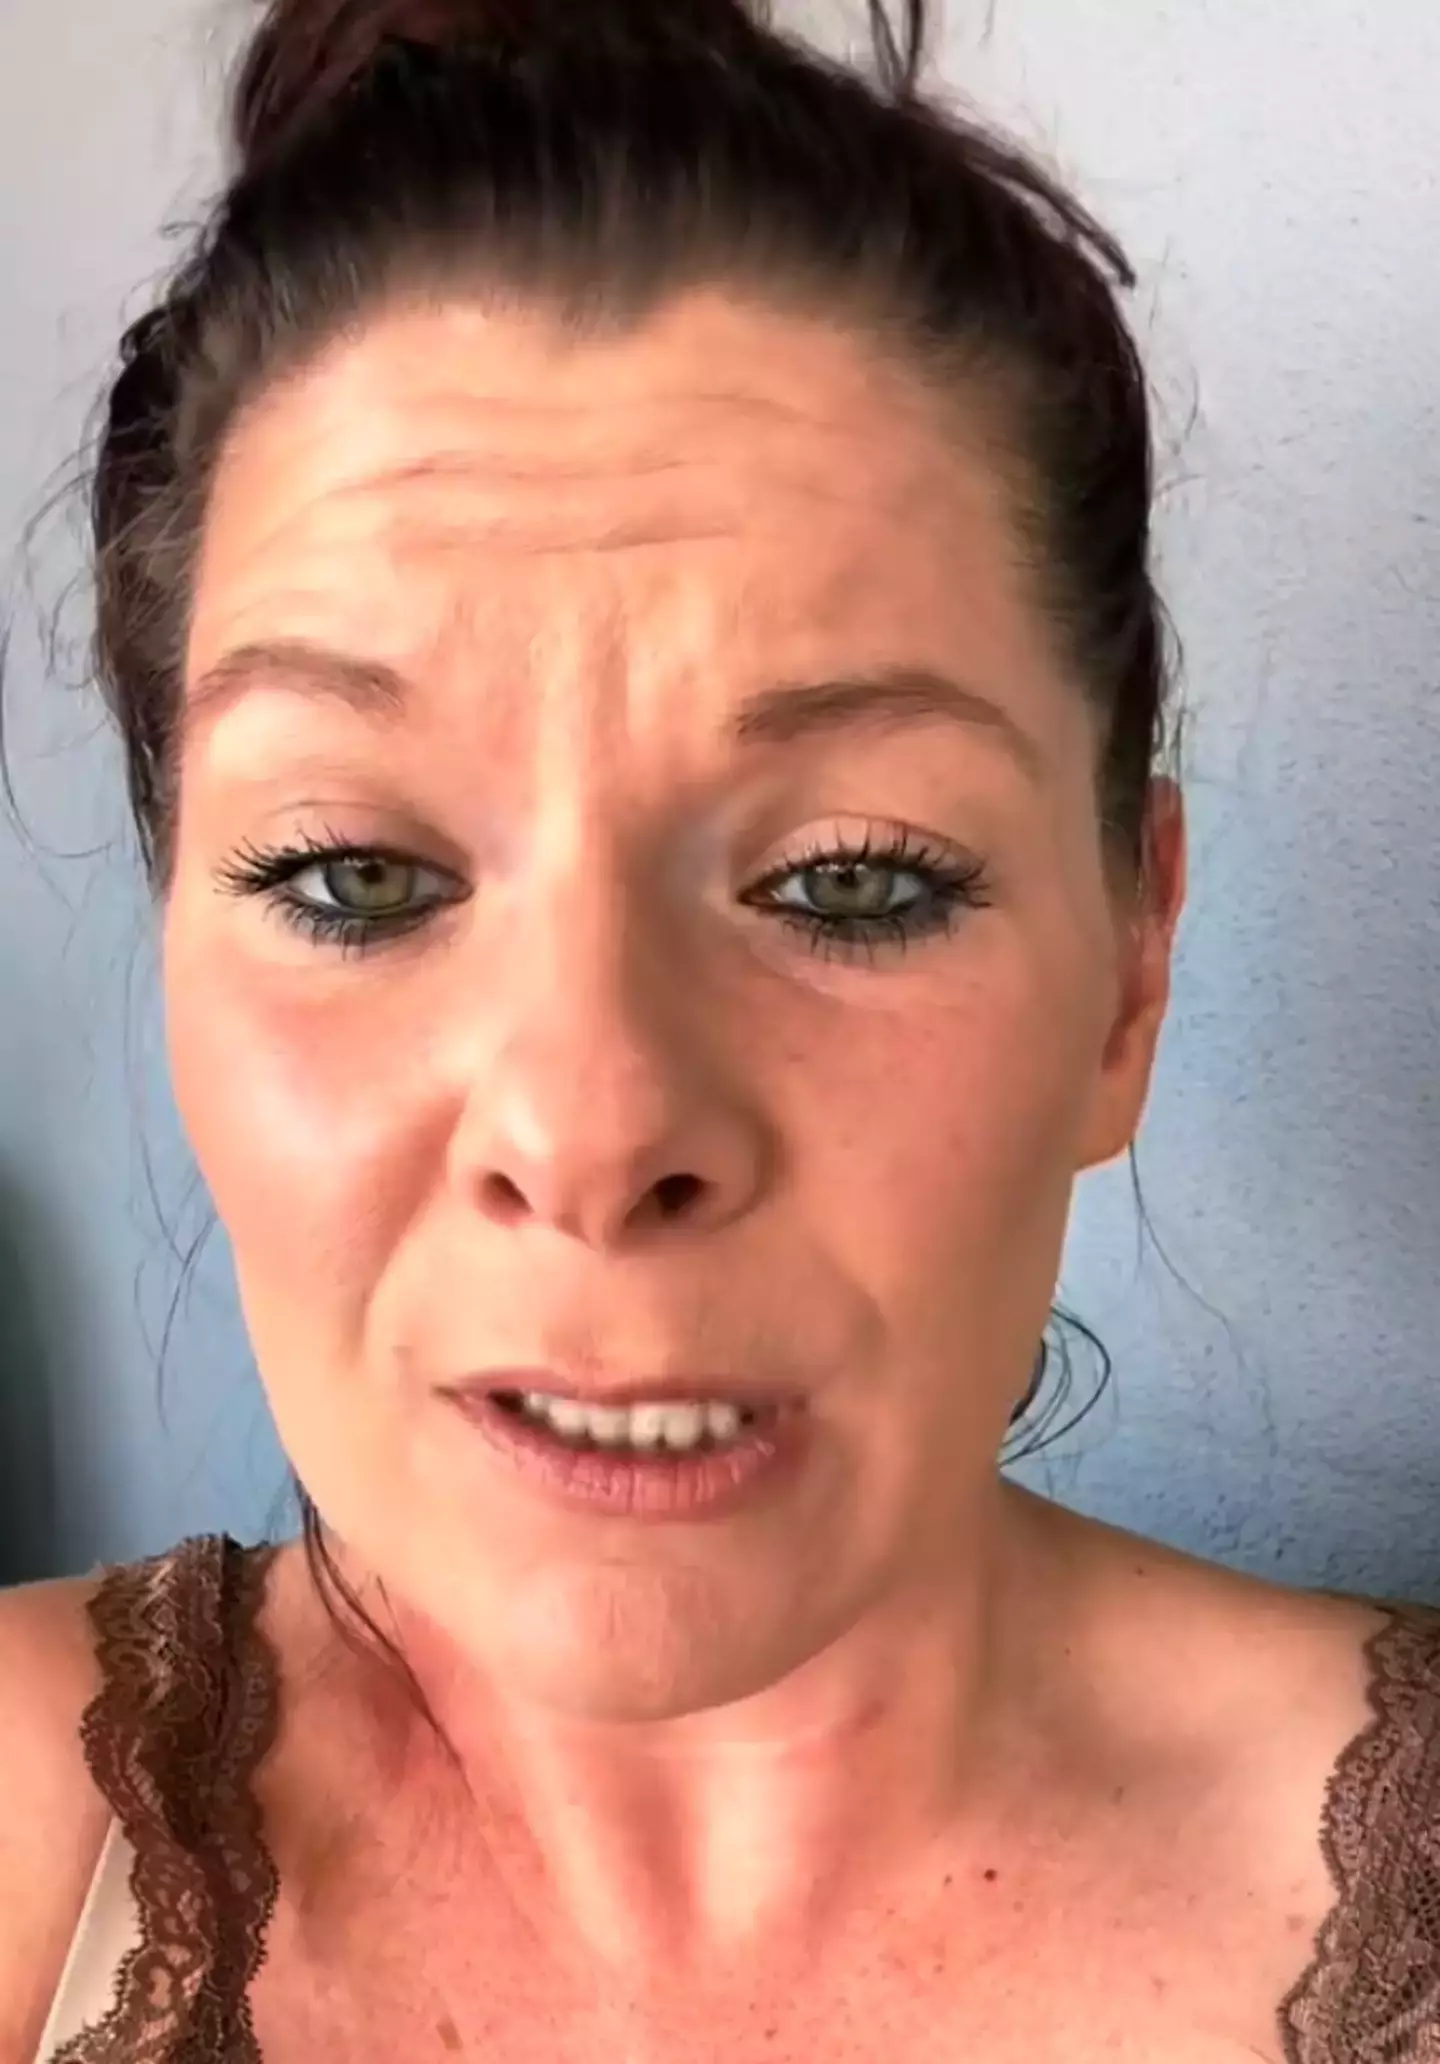 Tiffany Banks was gutted to find out her cruise had been cancelled at the very last minute. (TikTok/@thathippiedoc)